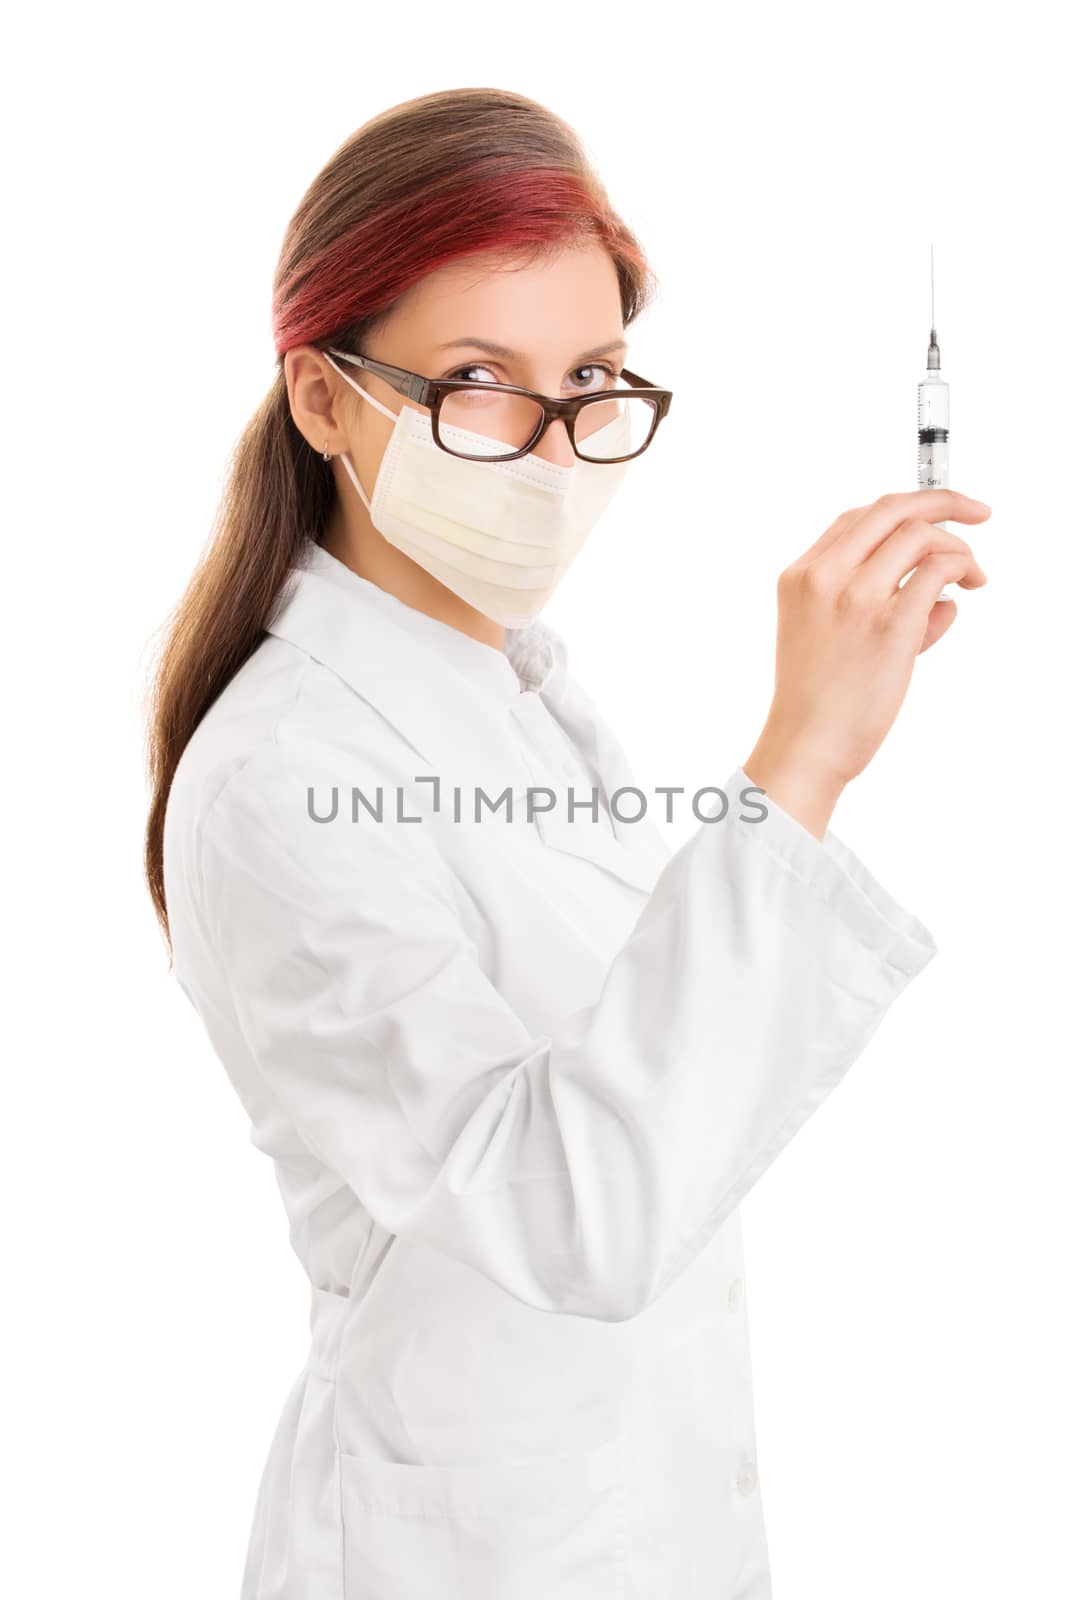 Doctor wearing surgical mask and holding a syringe with needle by Mendelex